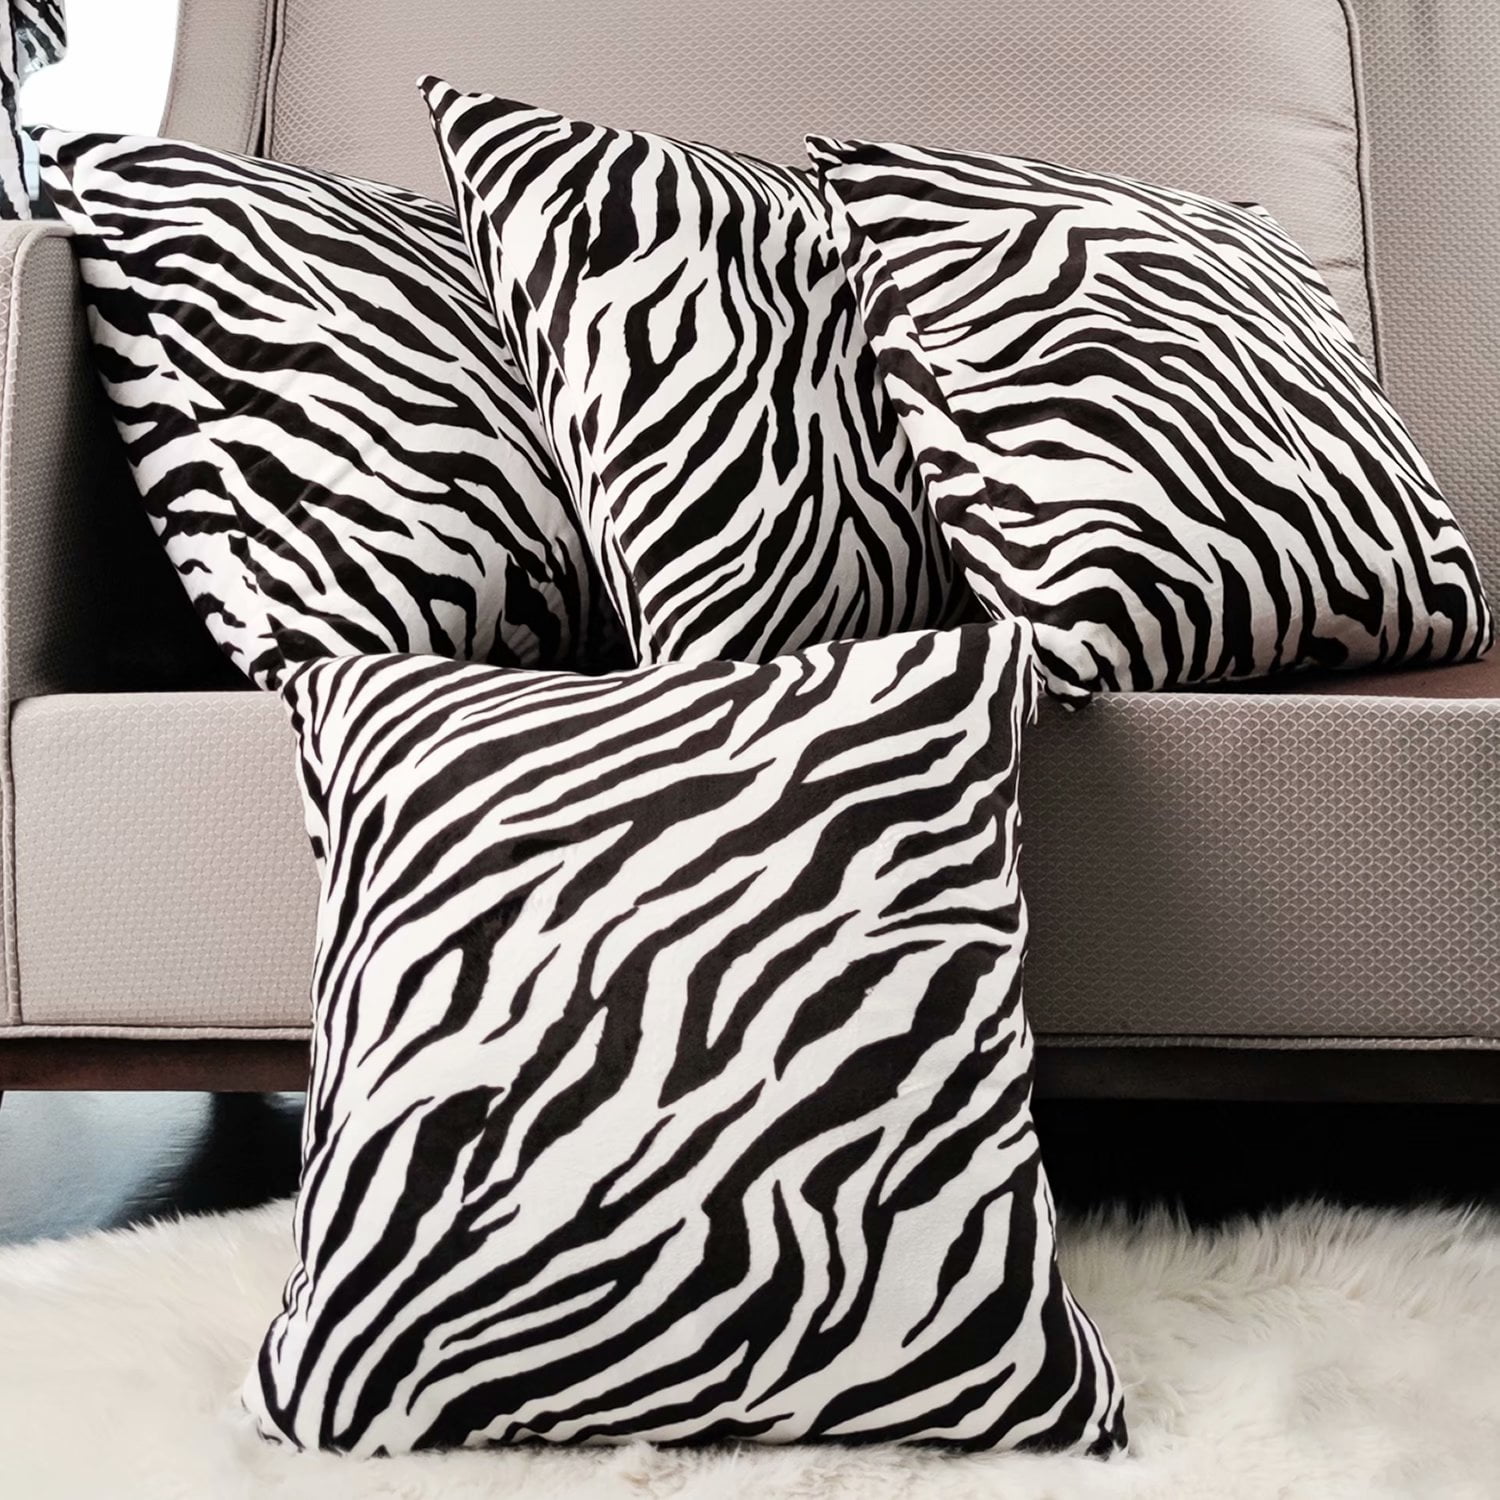 Solid Color Chair Cushion Cover Set for 4-inch Cushions (Covers